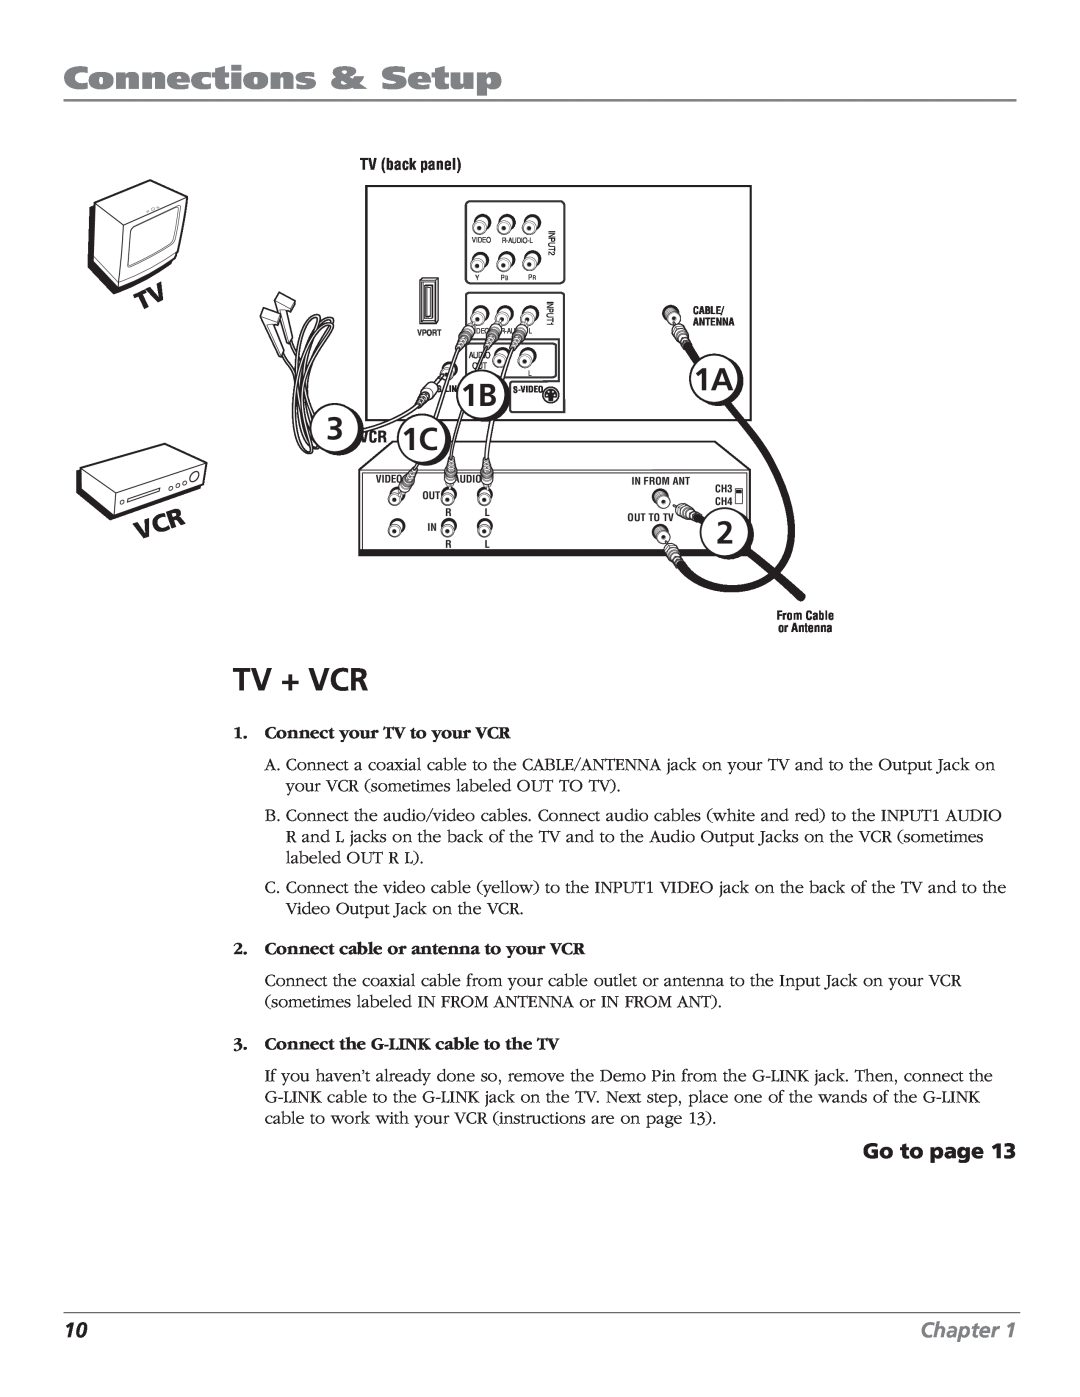 RCA MR68TF700 manual Tv + Vcr, Connections & Setup, Go to page, Chapter, Connect your TV to your VCR 